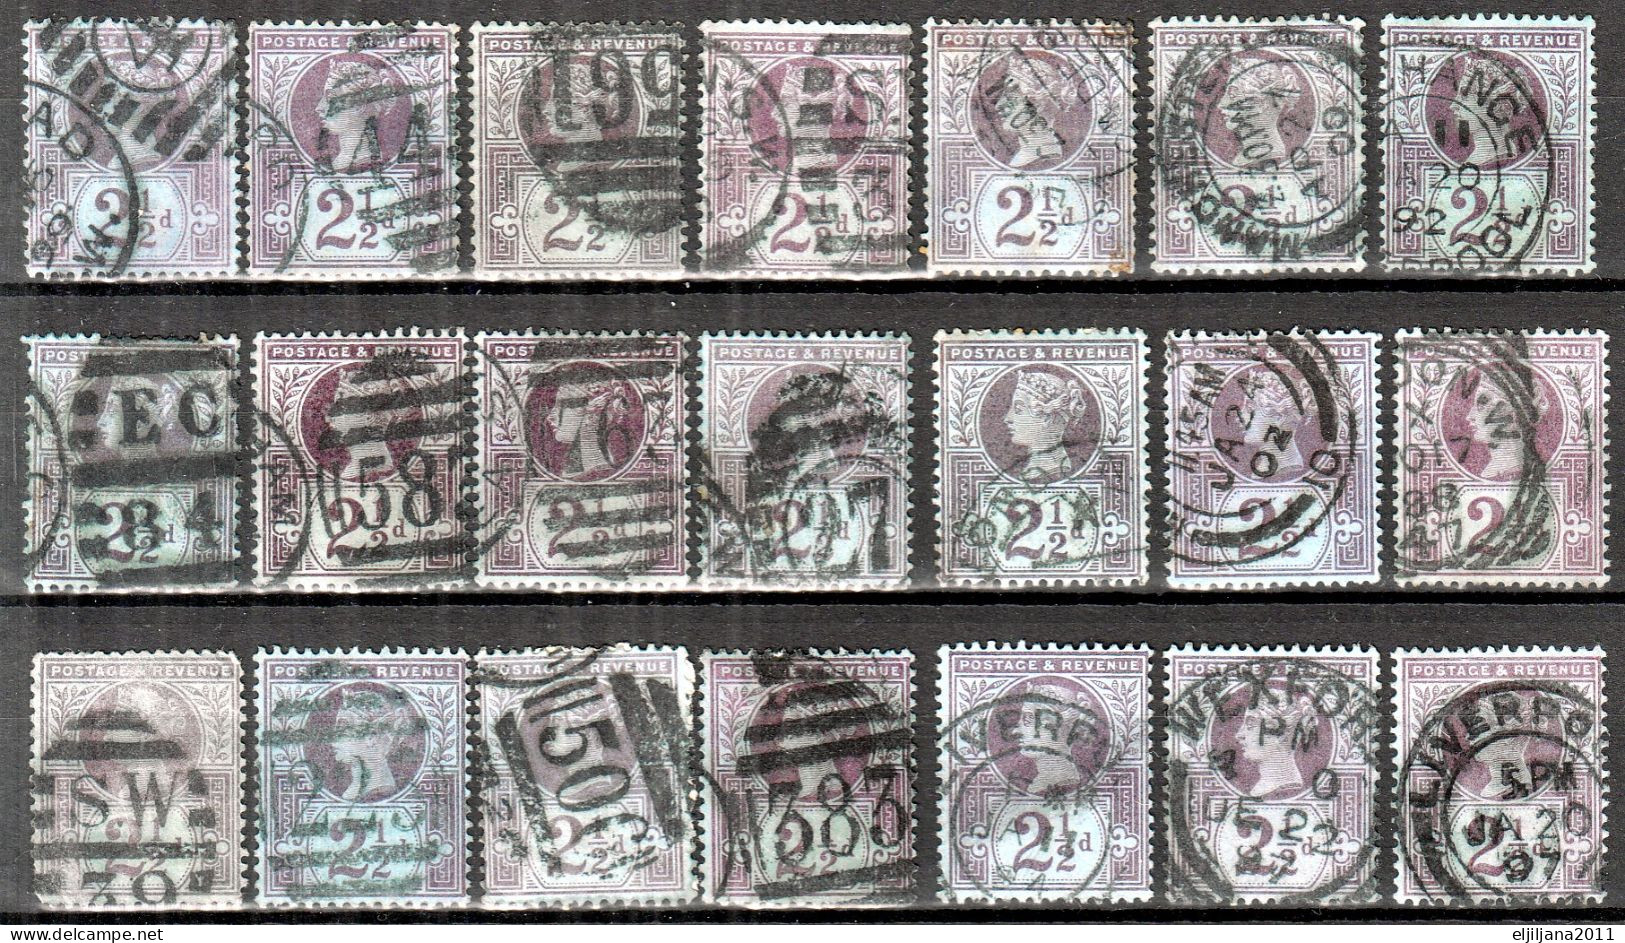 Great Britain GB / UK 1887 ⁕ QV Jubilee Issue 50th 2½d Mi.89 / SG 201 ⁕ 21v Used / Shades / Nice Postmark - Usados